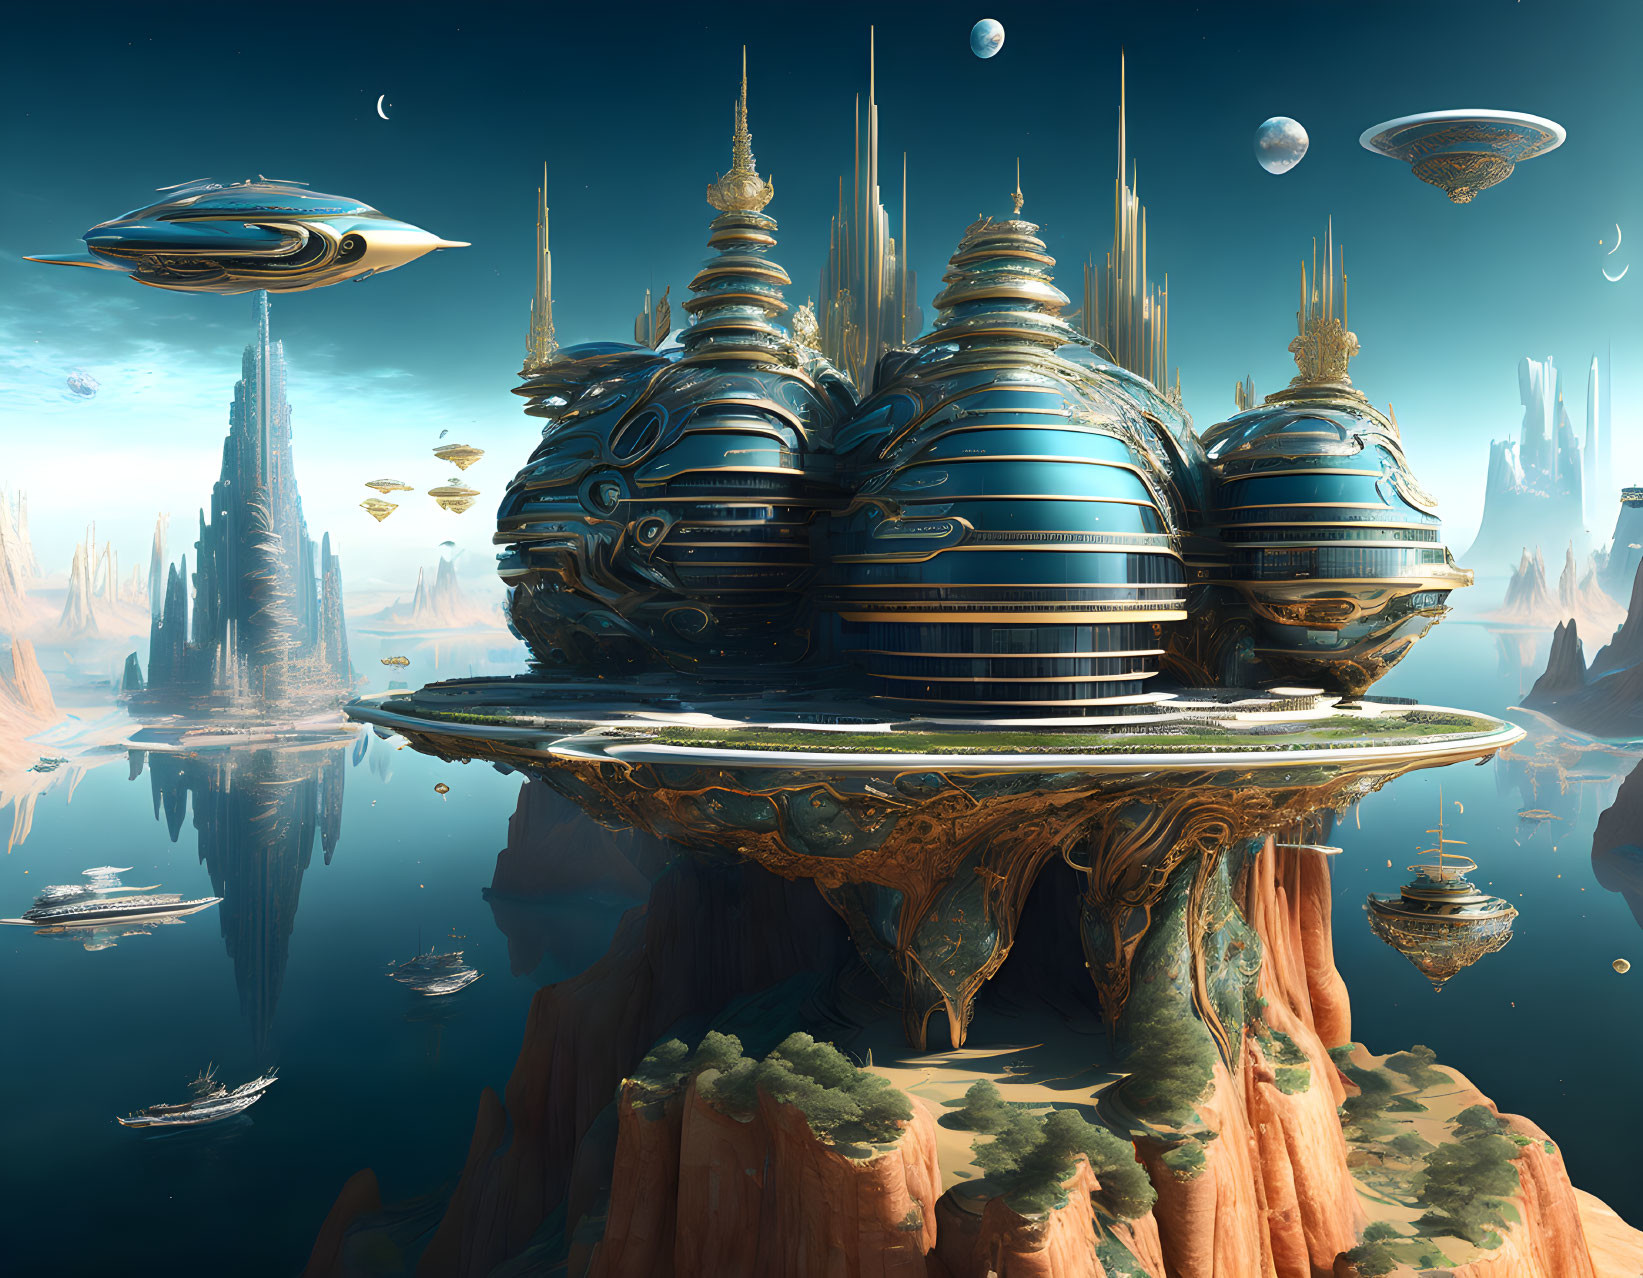 Advanced buildings on floating rock island in futuristic city.